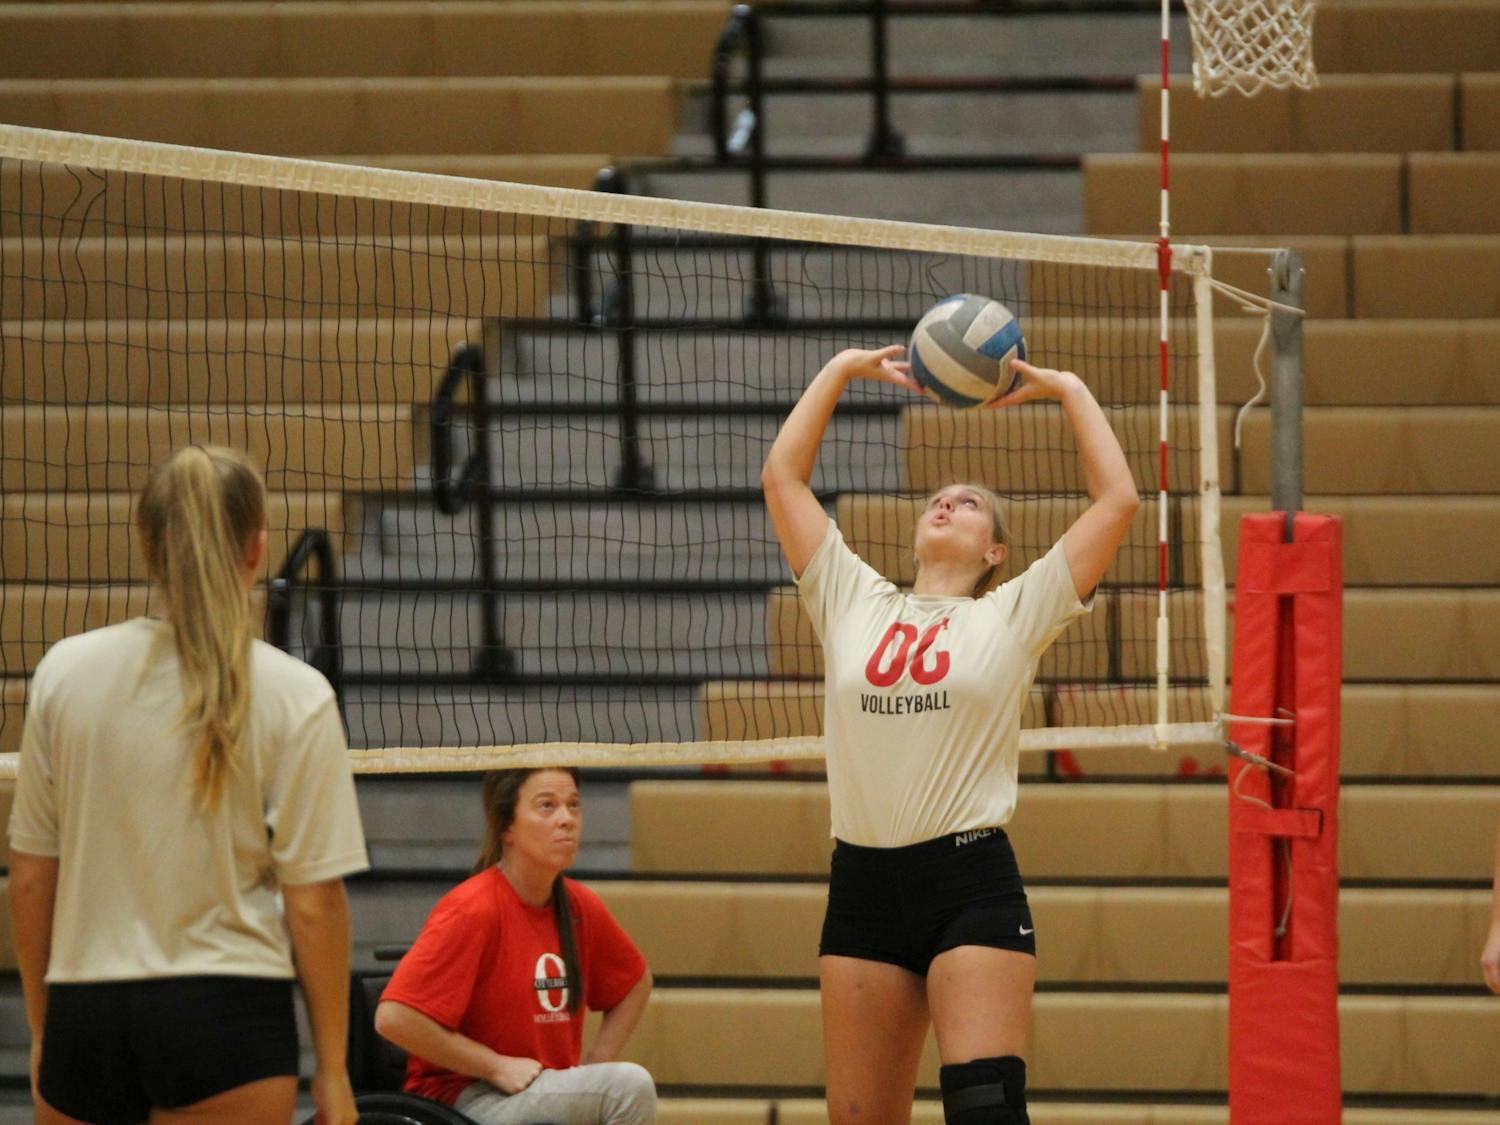 Otterbein volleyball's Kailey Mishler sets the ball during a practice on Aug. 30